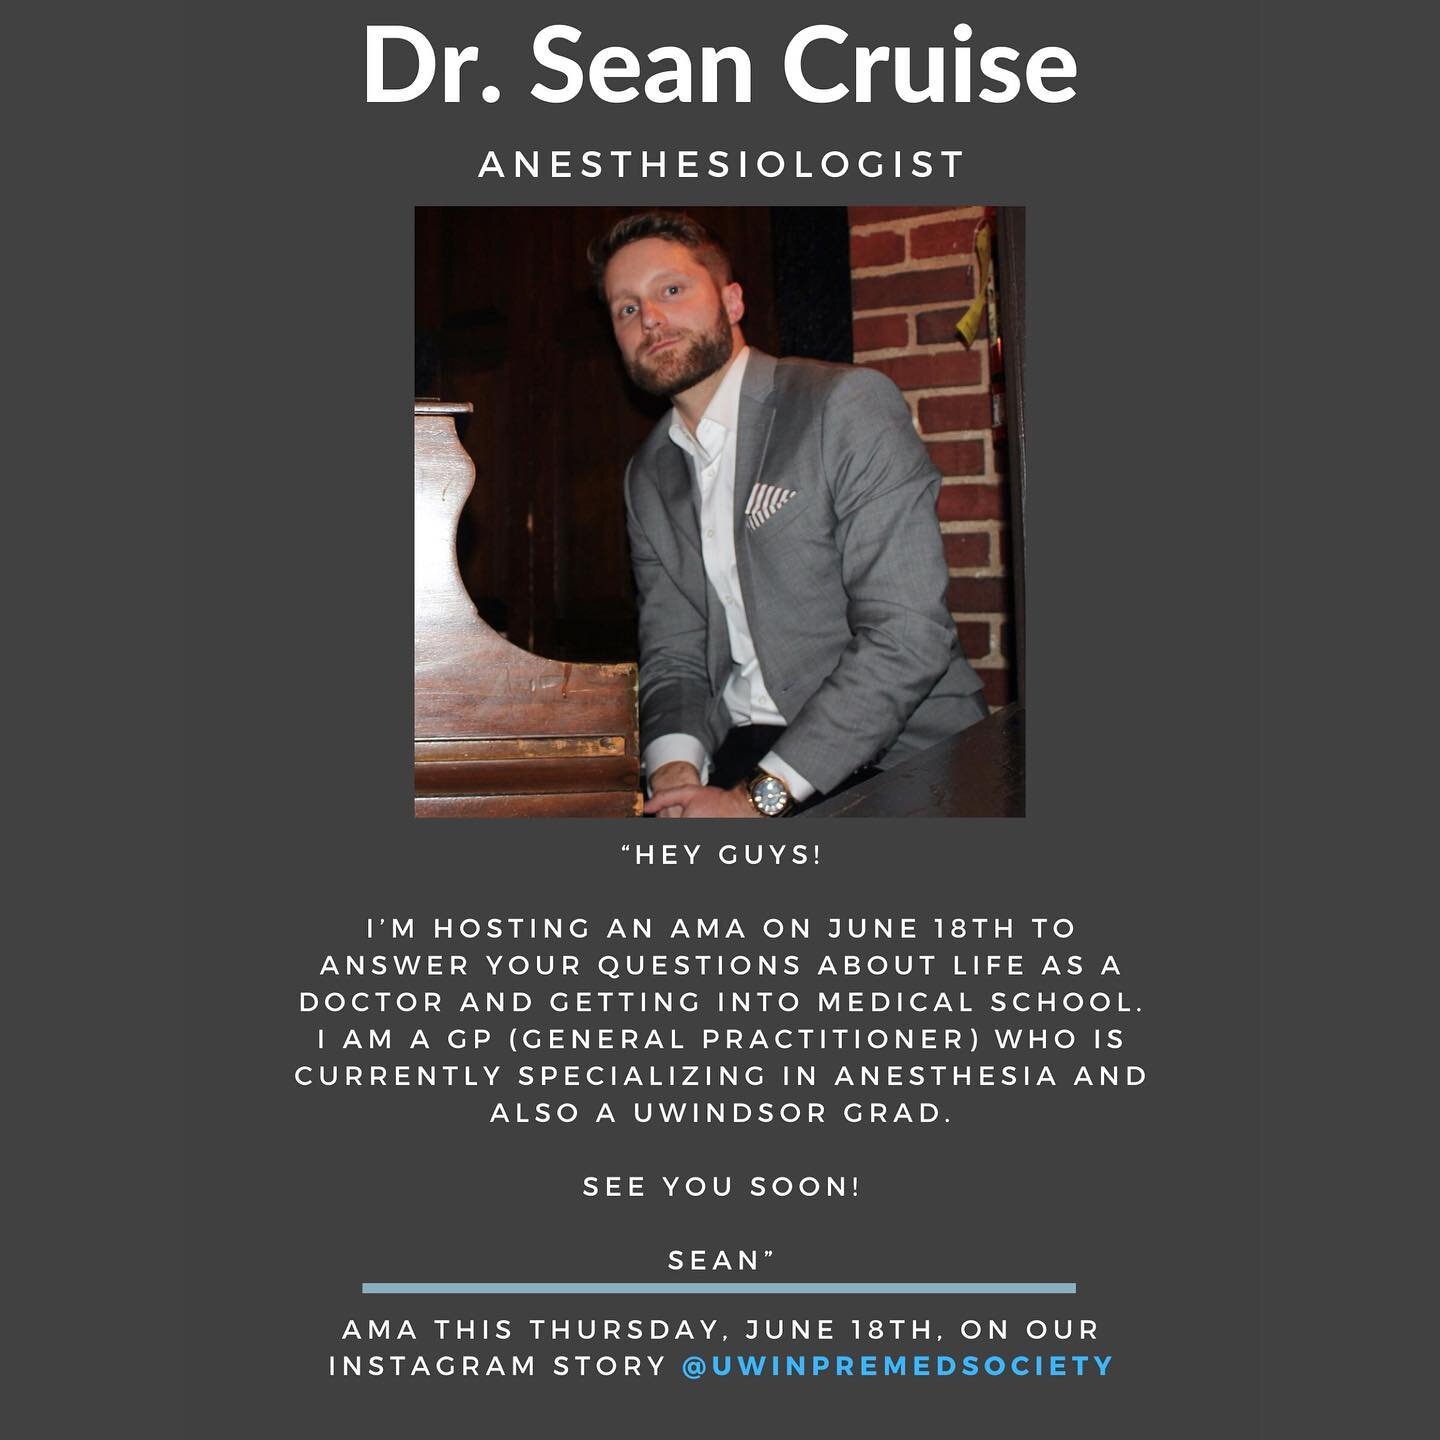 Tune in to our story all day tomorrow for our Thursday Q&amp;A featuring Dr. Sean Cruise! Dr. Cruise will be taking over our Instagram to answer any questions you may have about his undergrad/medical school journey or life as an anesthesiologist! Go 